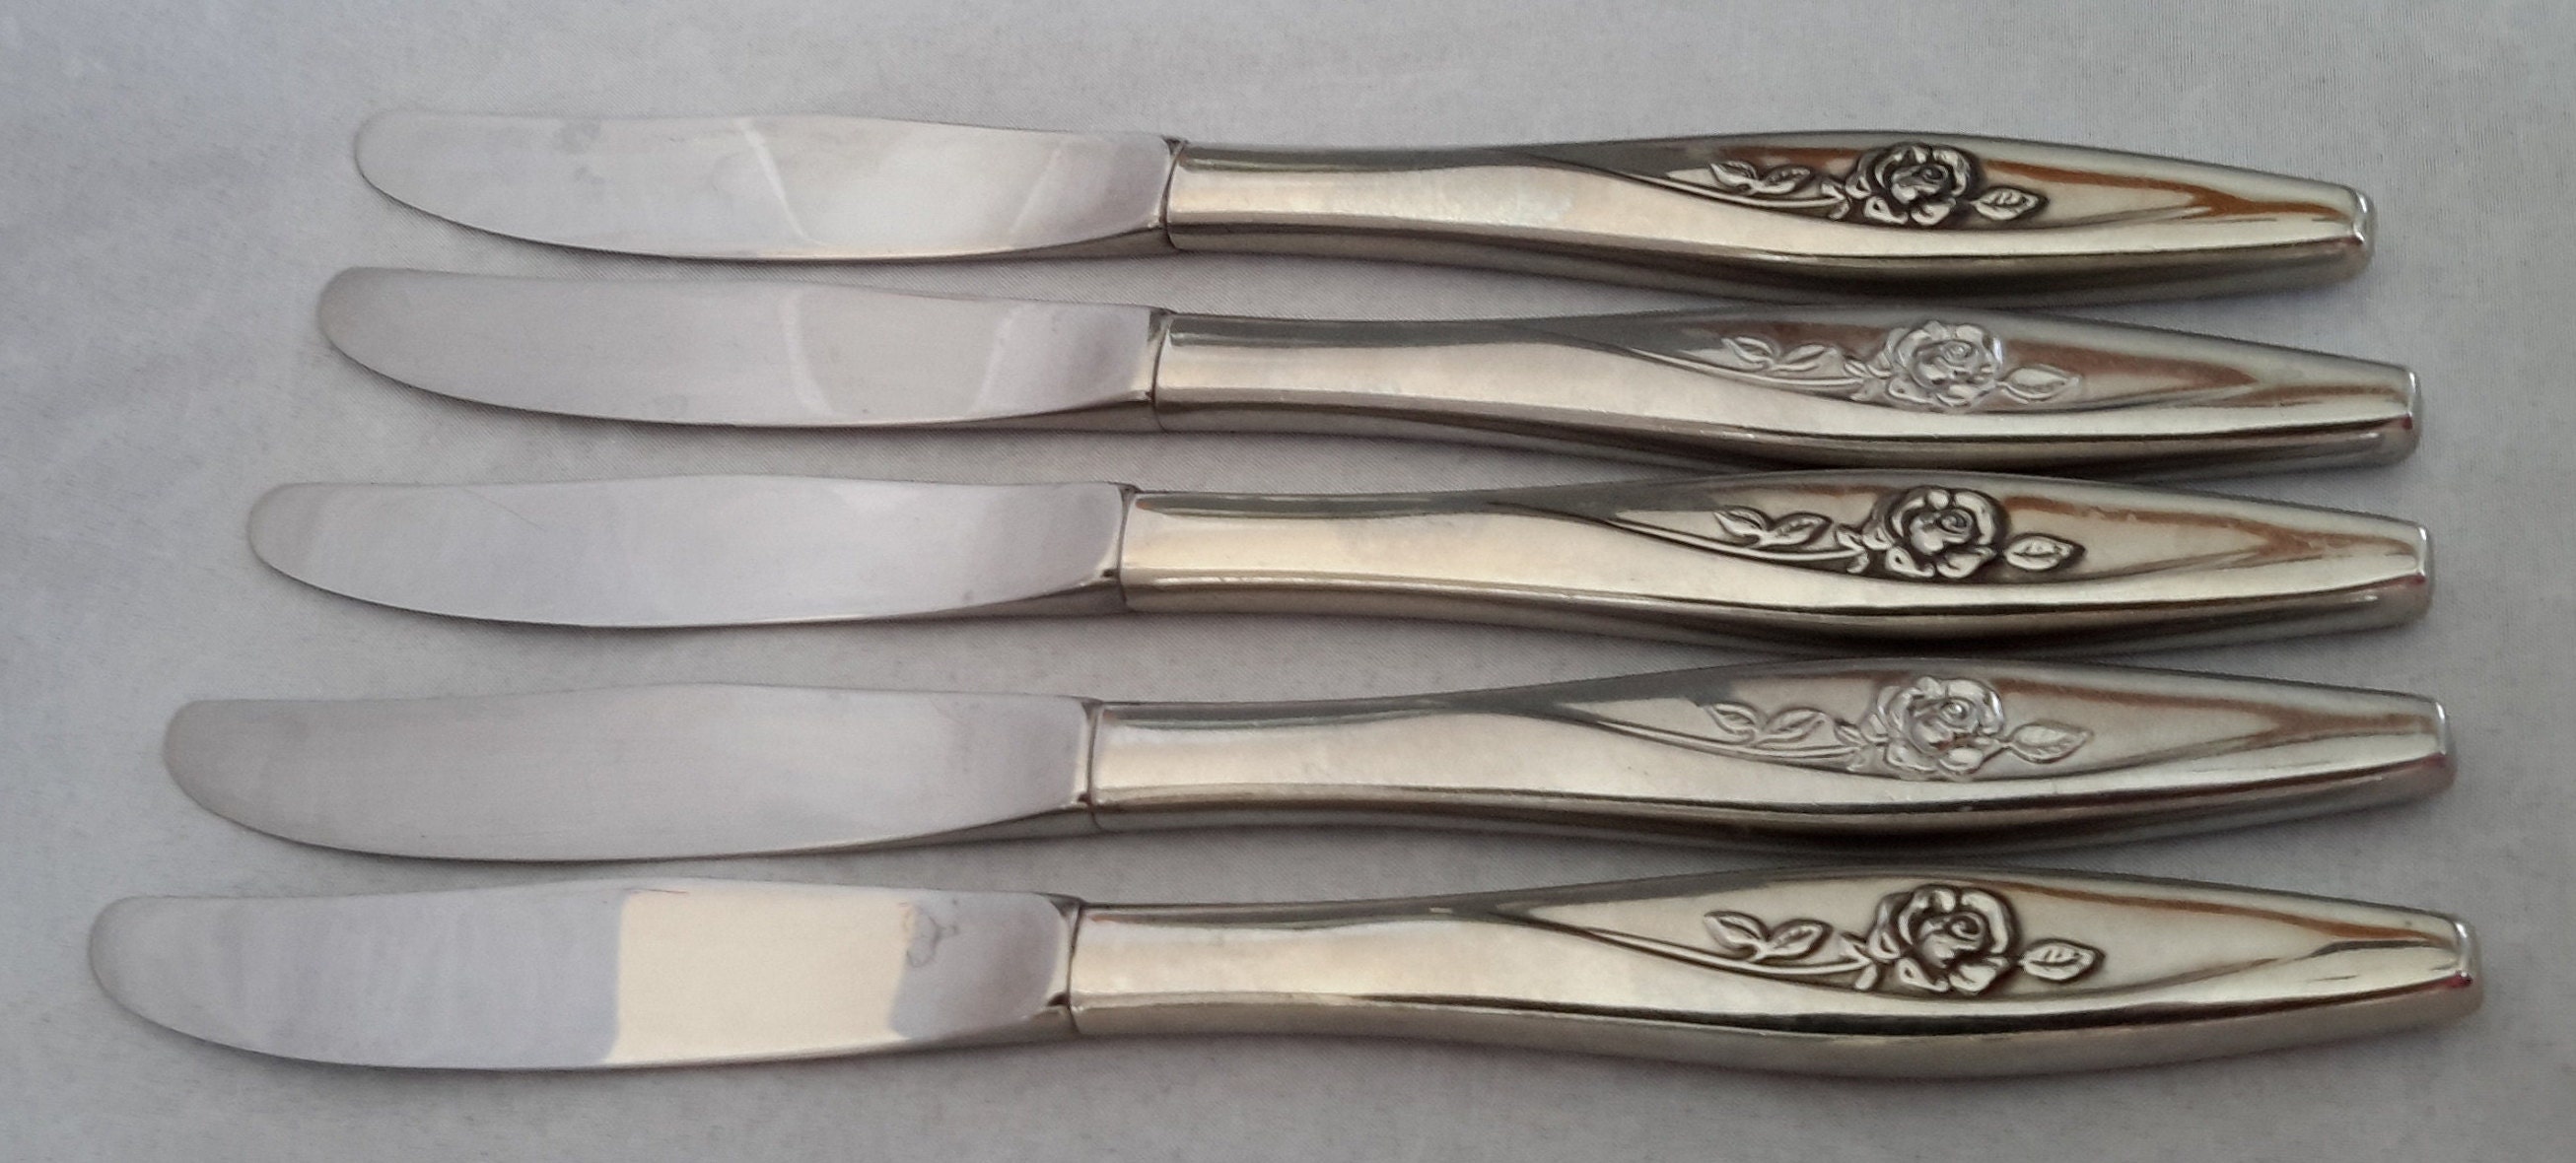 Oneida MY ROSE Hollow Knife Set of 4 and 21 similar items